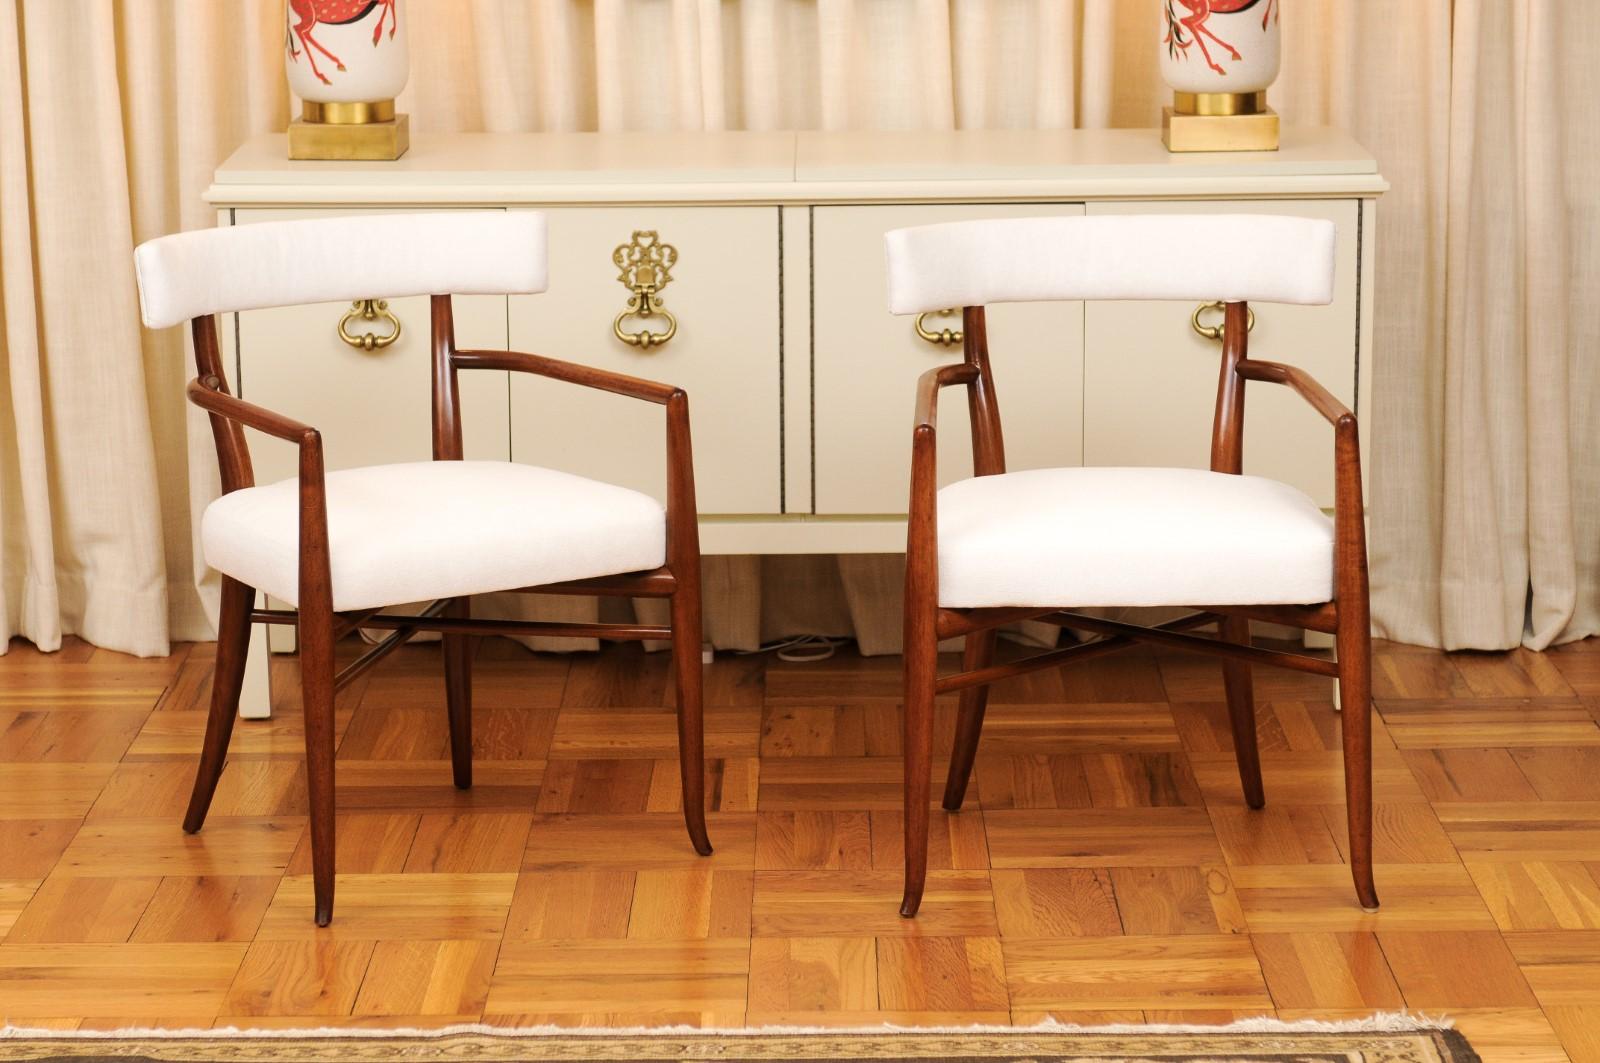 This magnificent set of dining chairs is shipped as professionally photographed and described in the listing narrative: Meticulously professionally restored, newly upholstered and completely installation ready. This large All Arm set of these rare